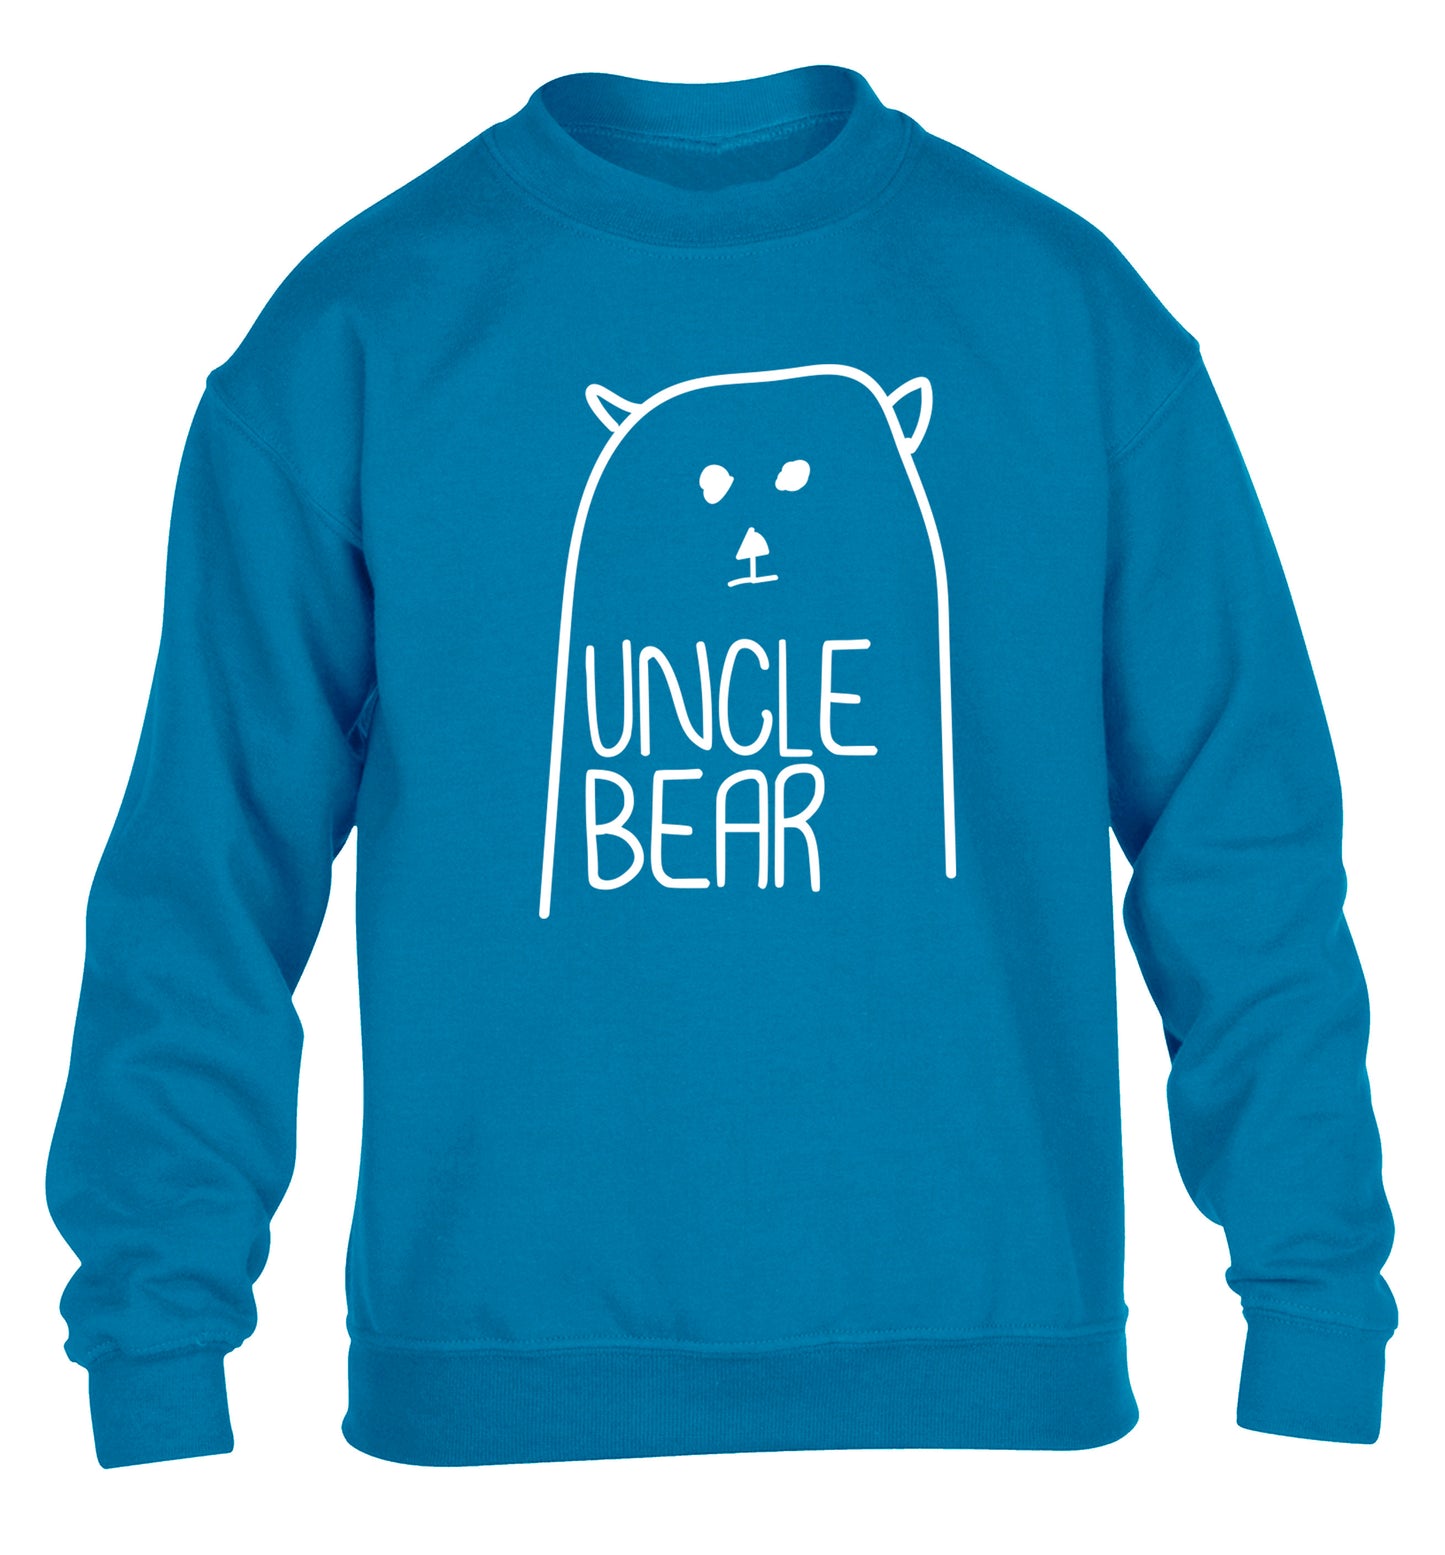 Uncle bear children's blue sweater 12-13 Years